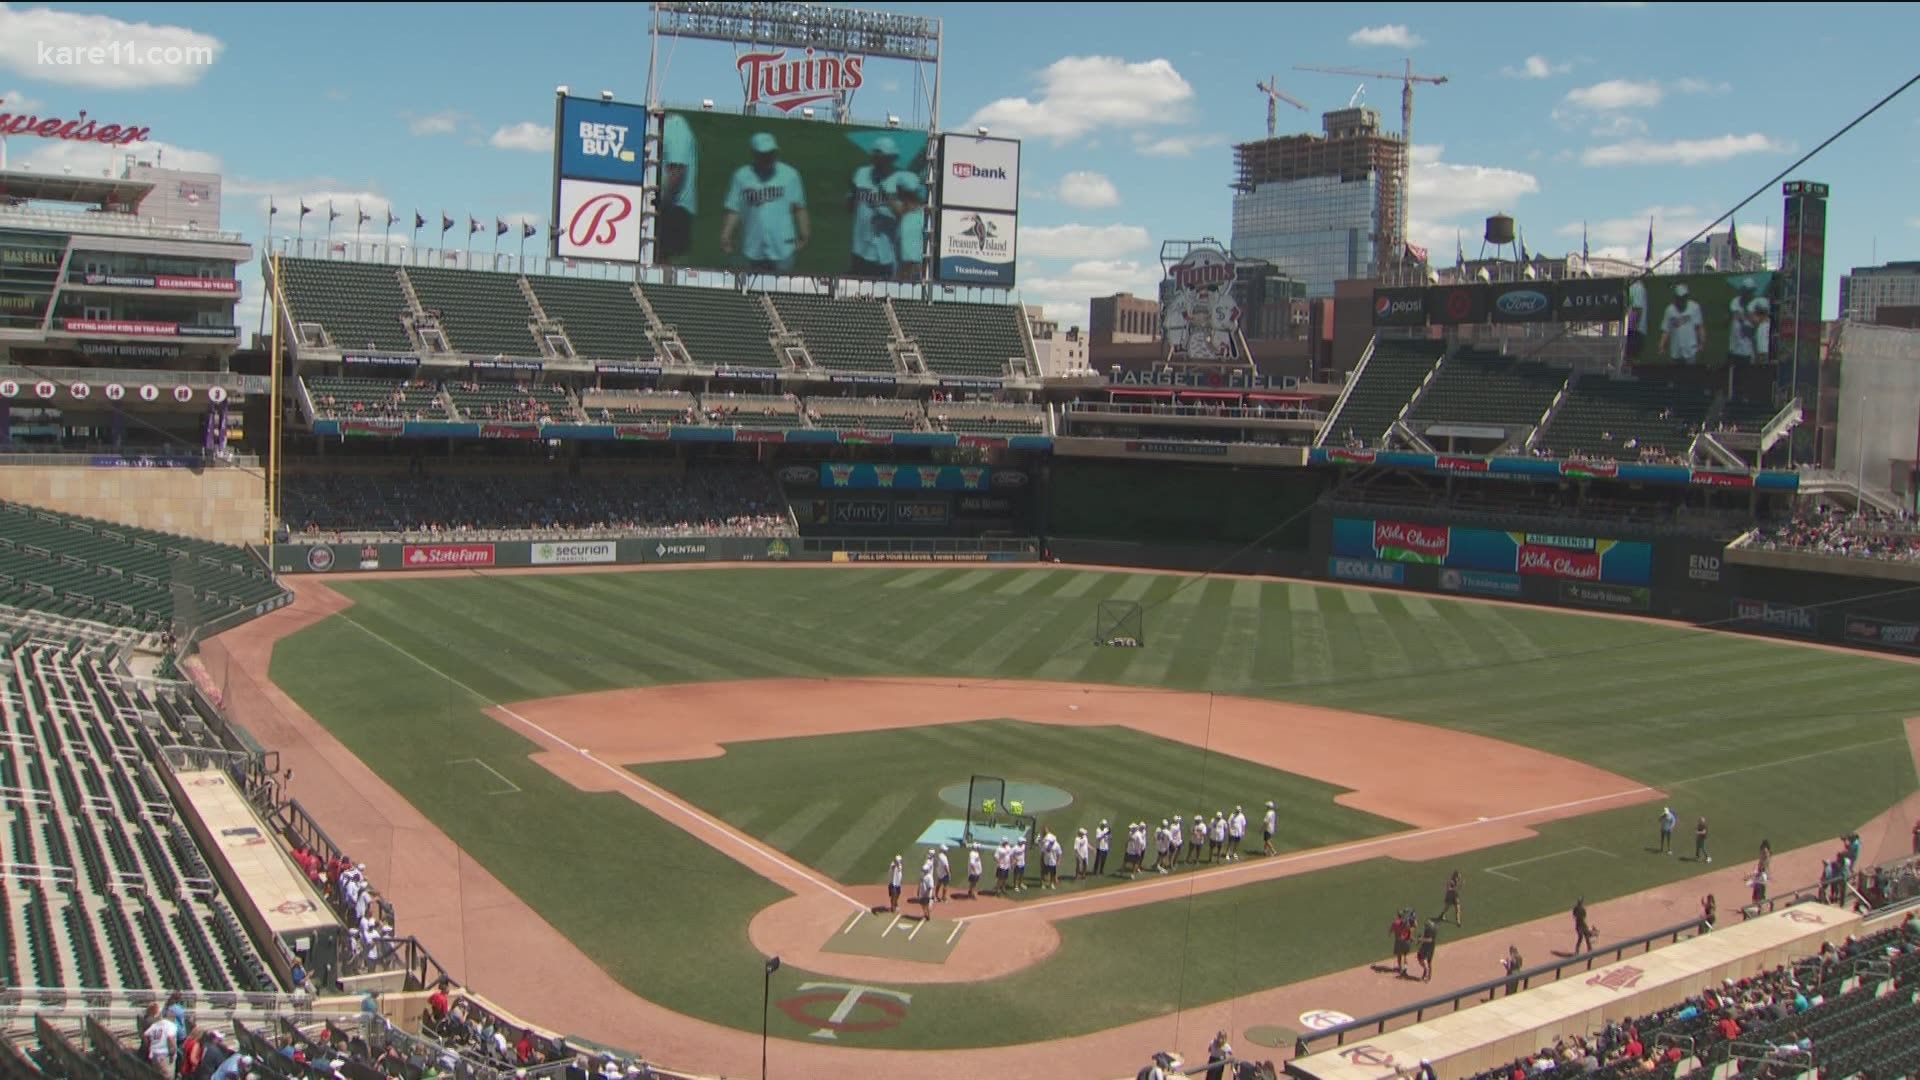 Here's what's new at Target Field for the 2021 Twins season